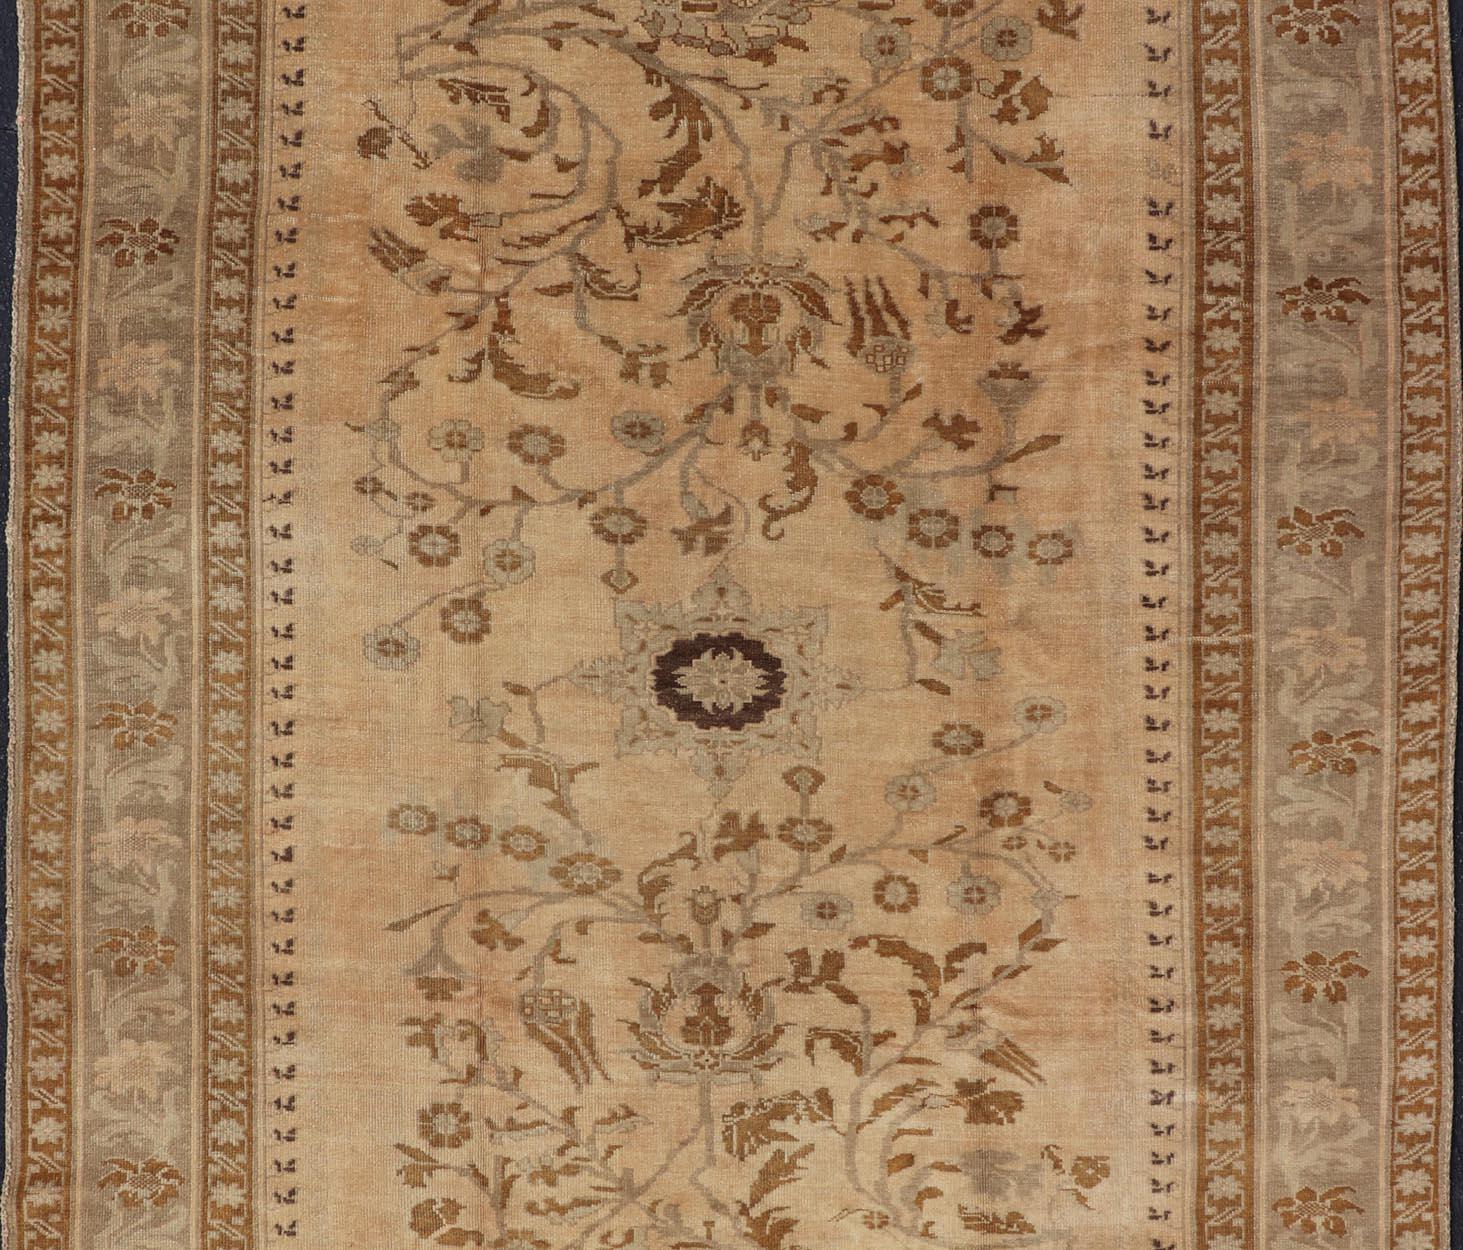 Vintage Turkish Oushak Rug with Detailed Vines and Flowers in Earthy Tones In Good Condition For Sale In Atlanta, GA